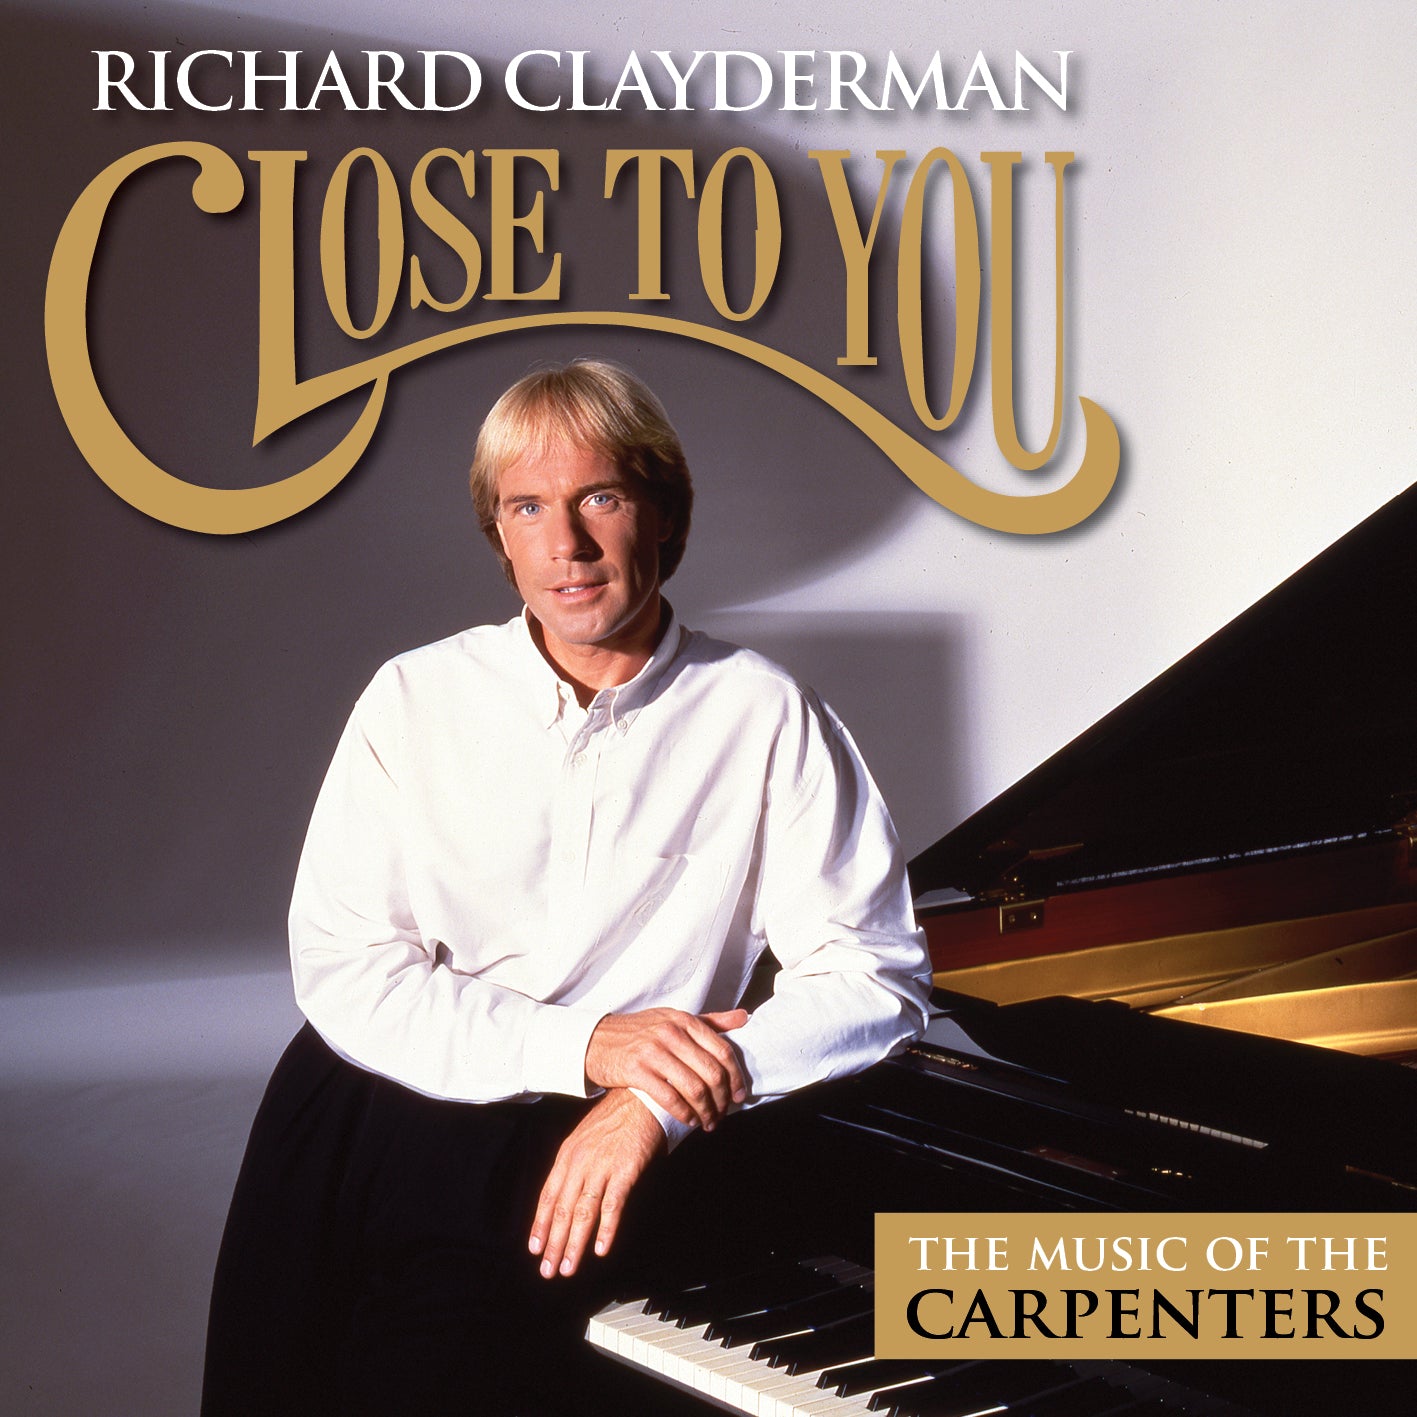 RICHARD CLAYDERMAN - CLOSE TO YOU THE MUSIC OF THE CARPENTERS